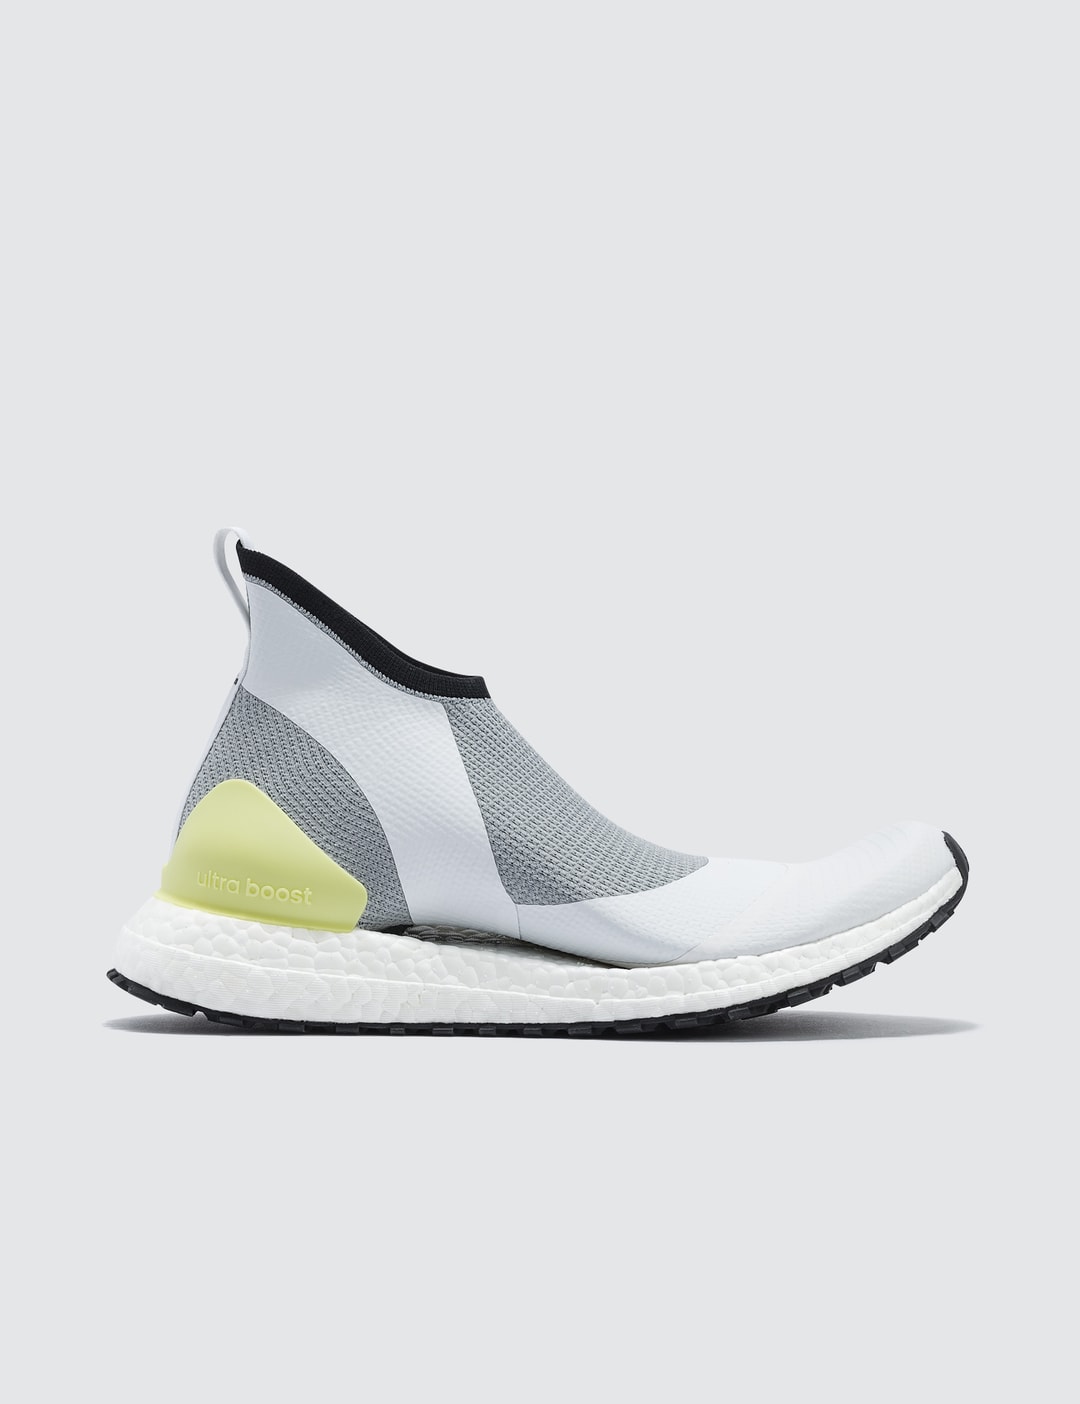 Adidas by Stella McCartney All Terrain S. | HBX - Globally Curated Fashion and Lifestyle by